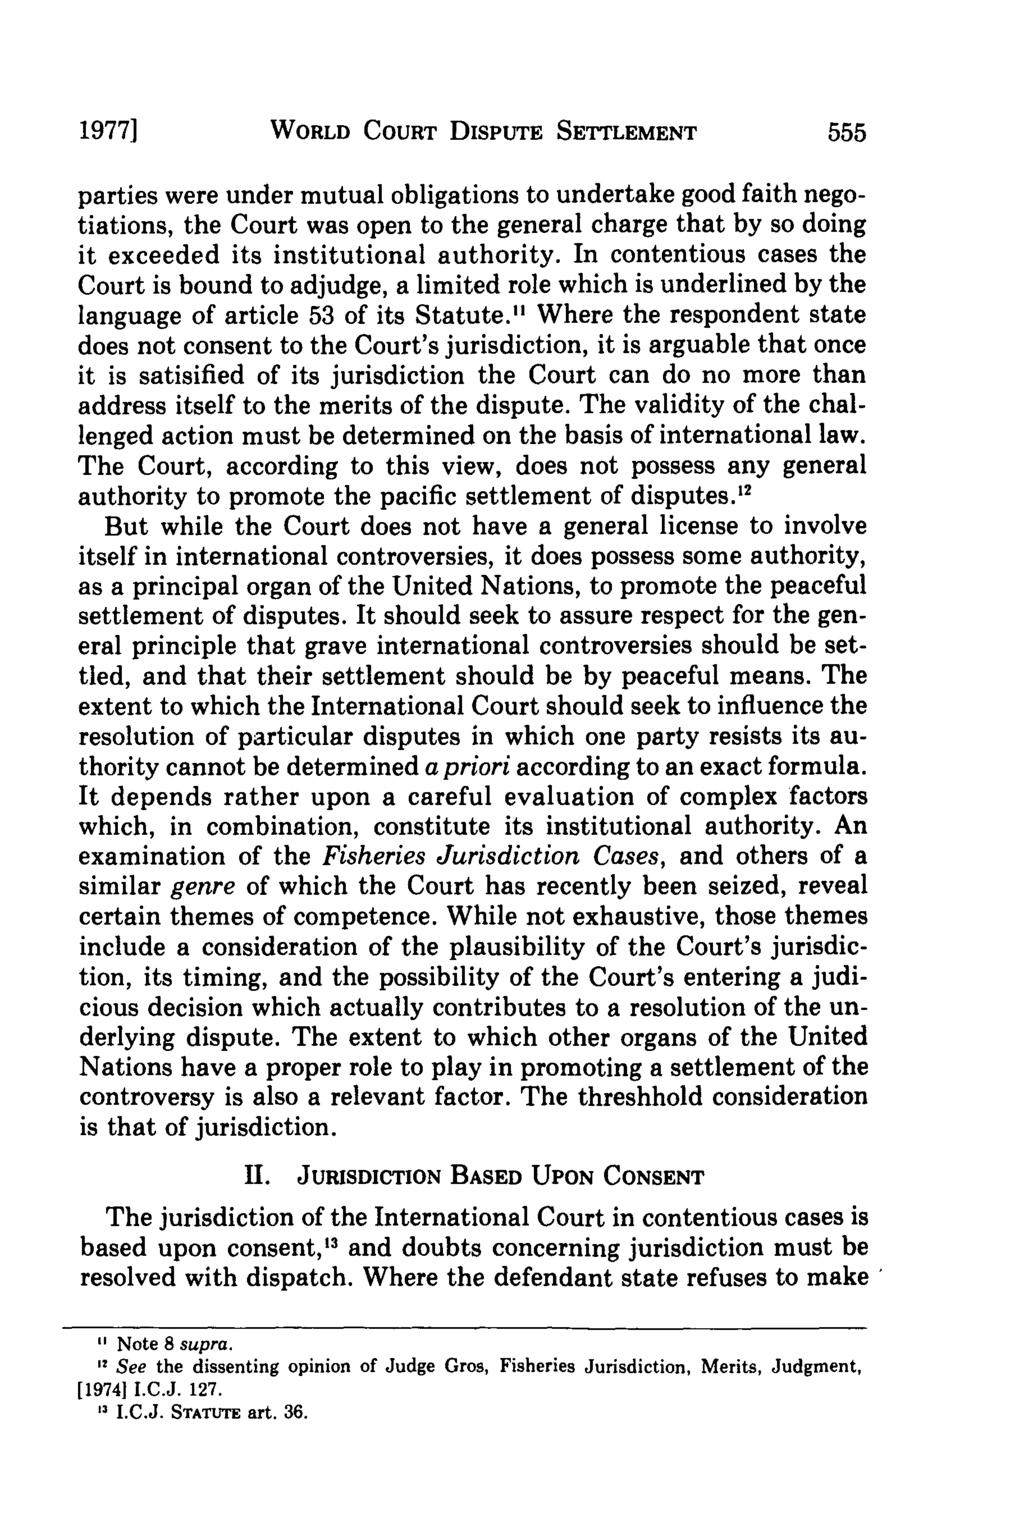 19771 WORLD COURT DISPUTE SETTLEMENT parties were under mutual obligations to undertake good faith negotiations, the Court was open to the general charge that by so doing it exceeded its